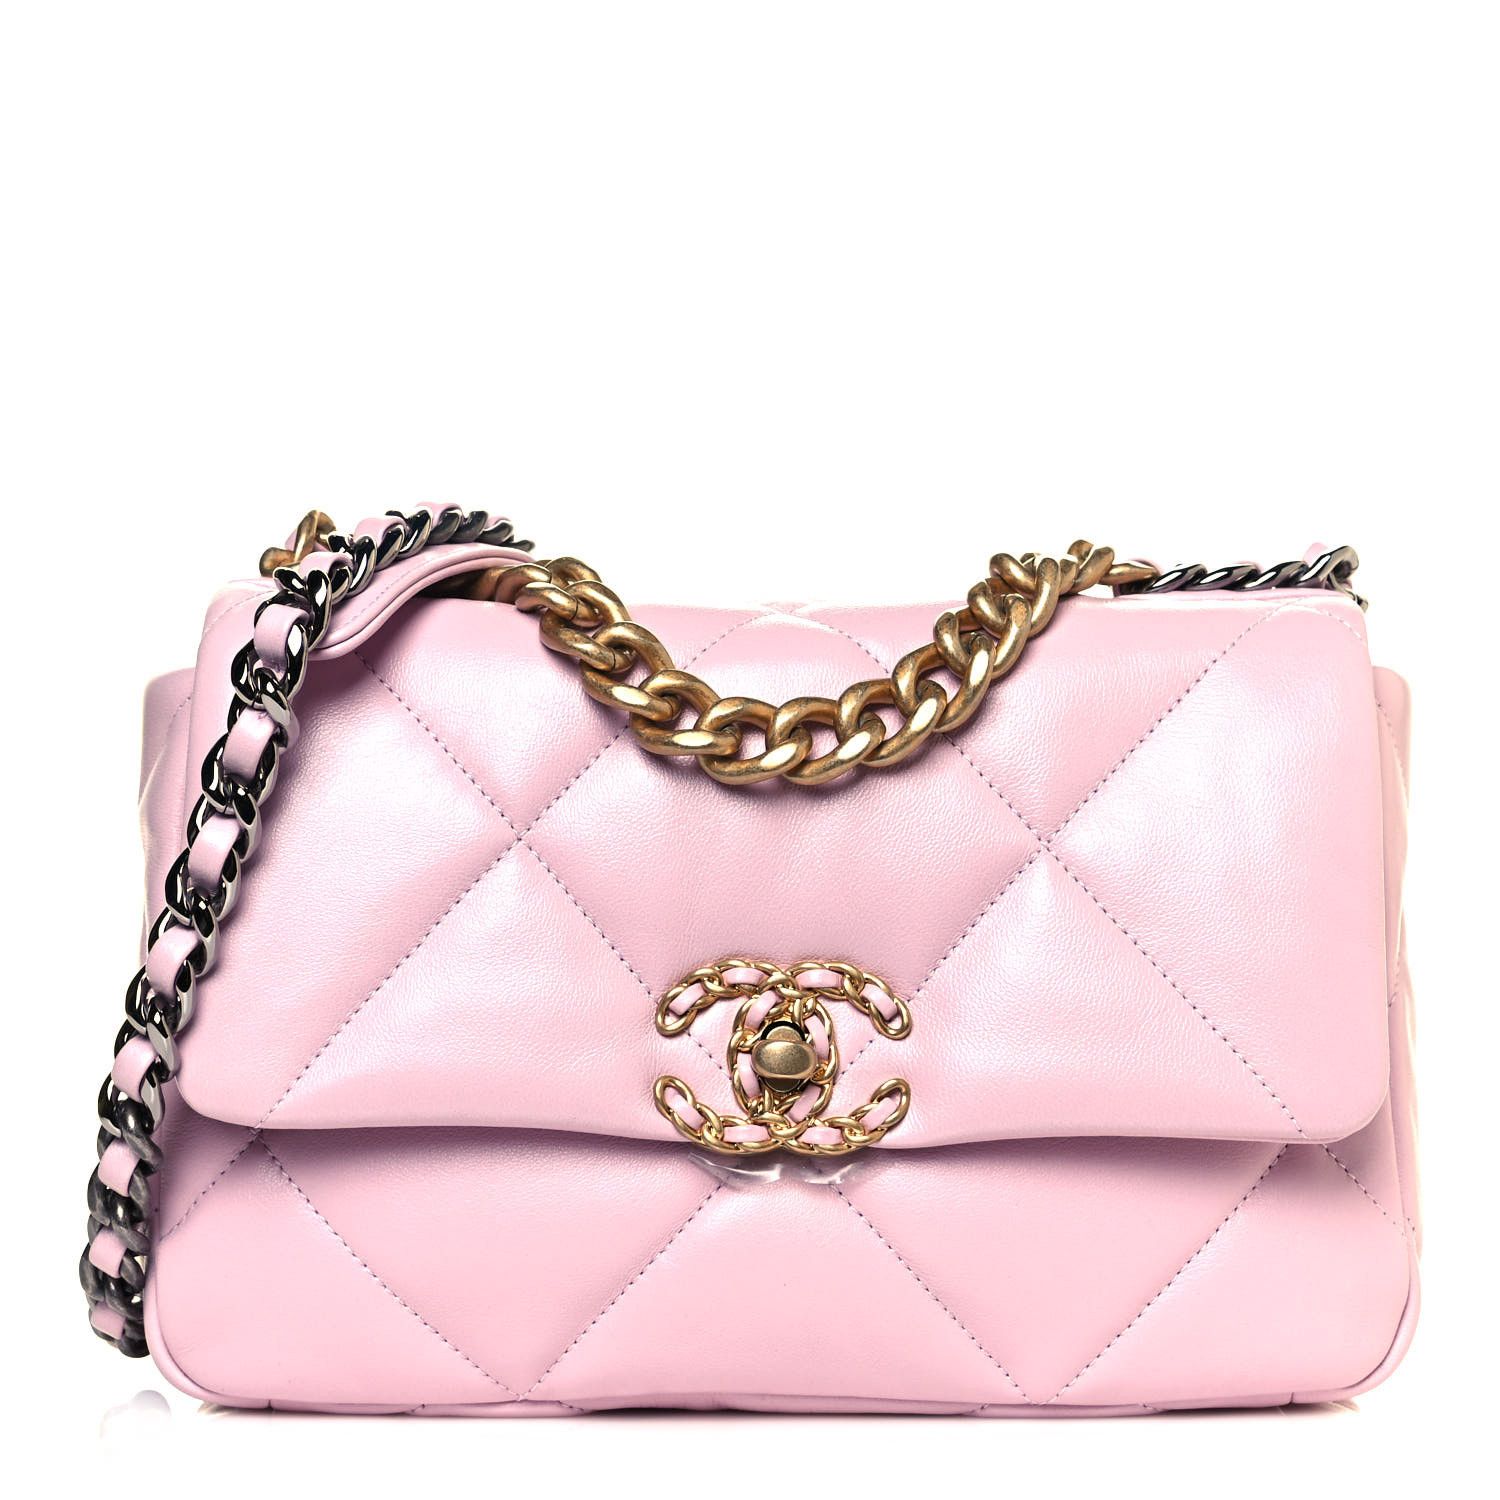 CHANEL

Lambskin Quilted Medium Chanel 19 Flap Light Pink | Fashionphile